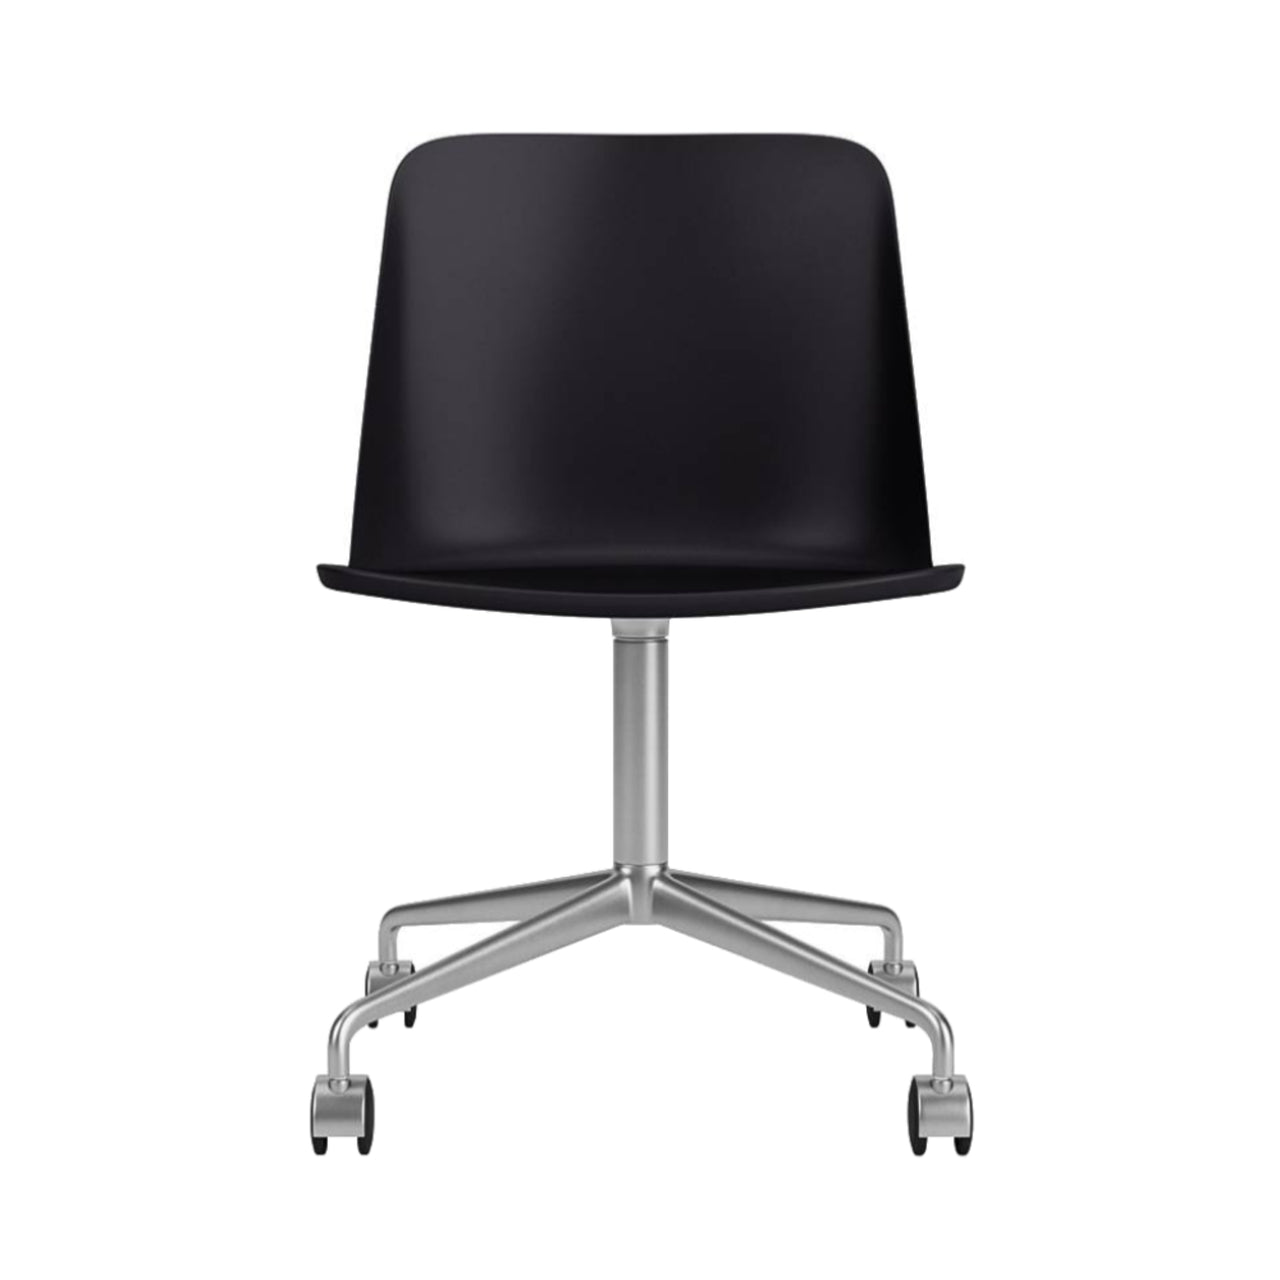 Rely Chair HW21: Black + Polished Aluminum